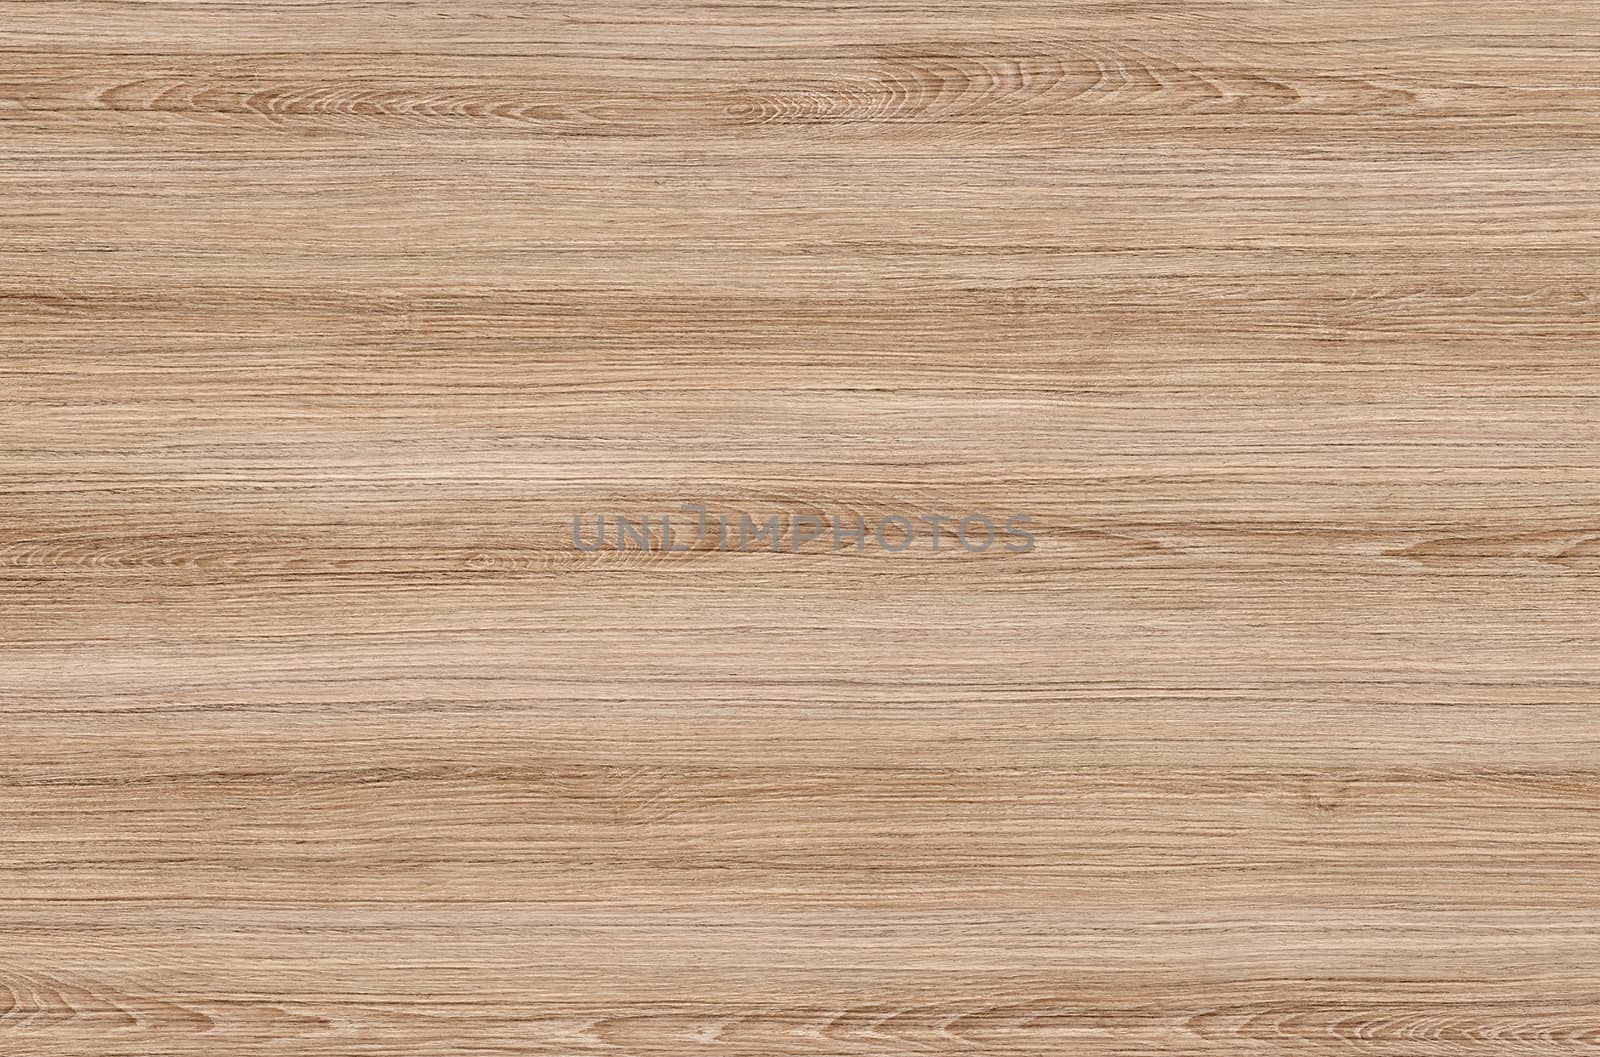 Brown wood texture. Abstract wood texture background.